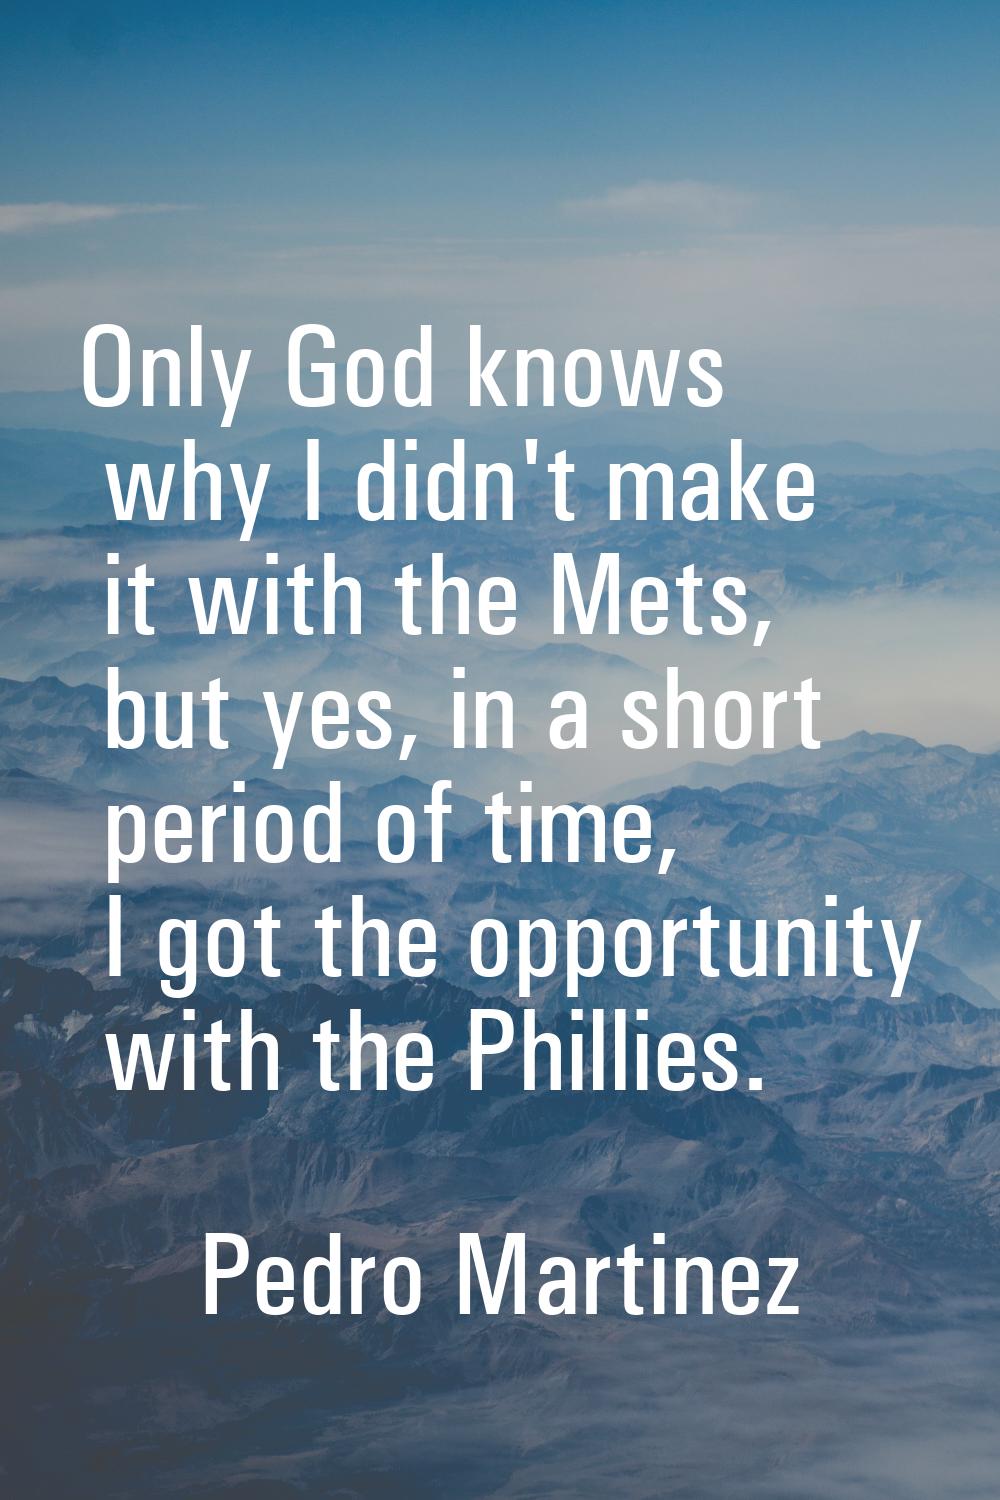 Only God knows why I didn't make it with the Mets, but yes, in a short period of time, I got the op